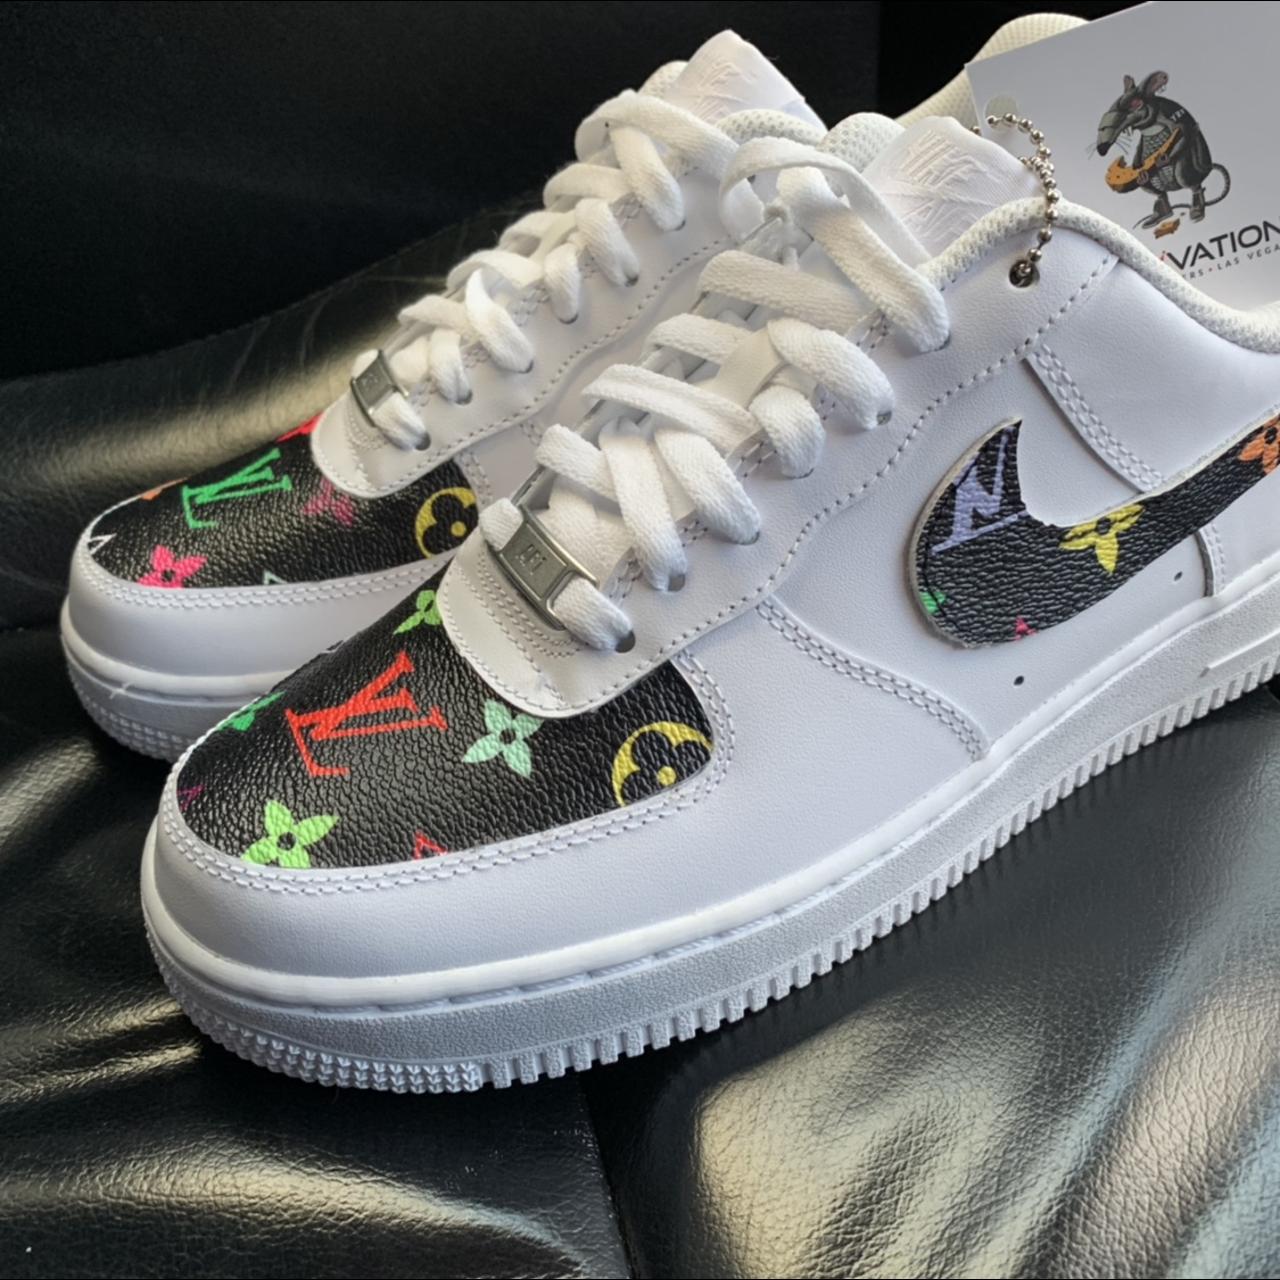 Nike Air Force 1 with Louis Vuitton fabric Size 9.5 - Depop